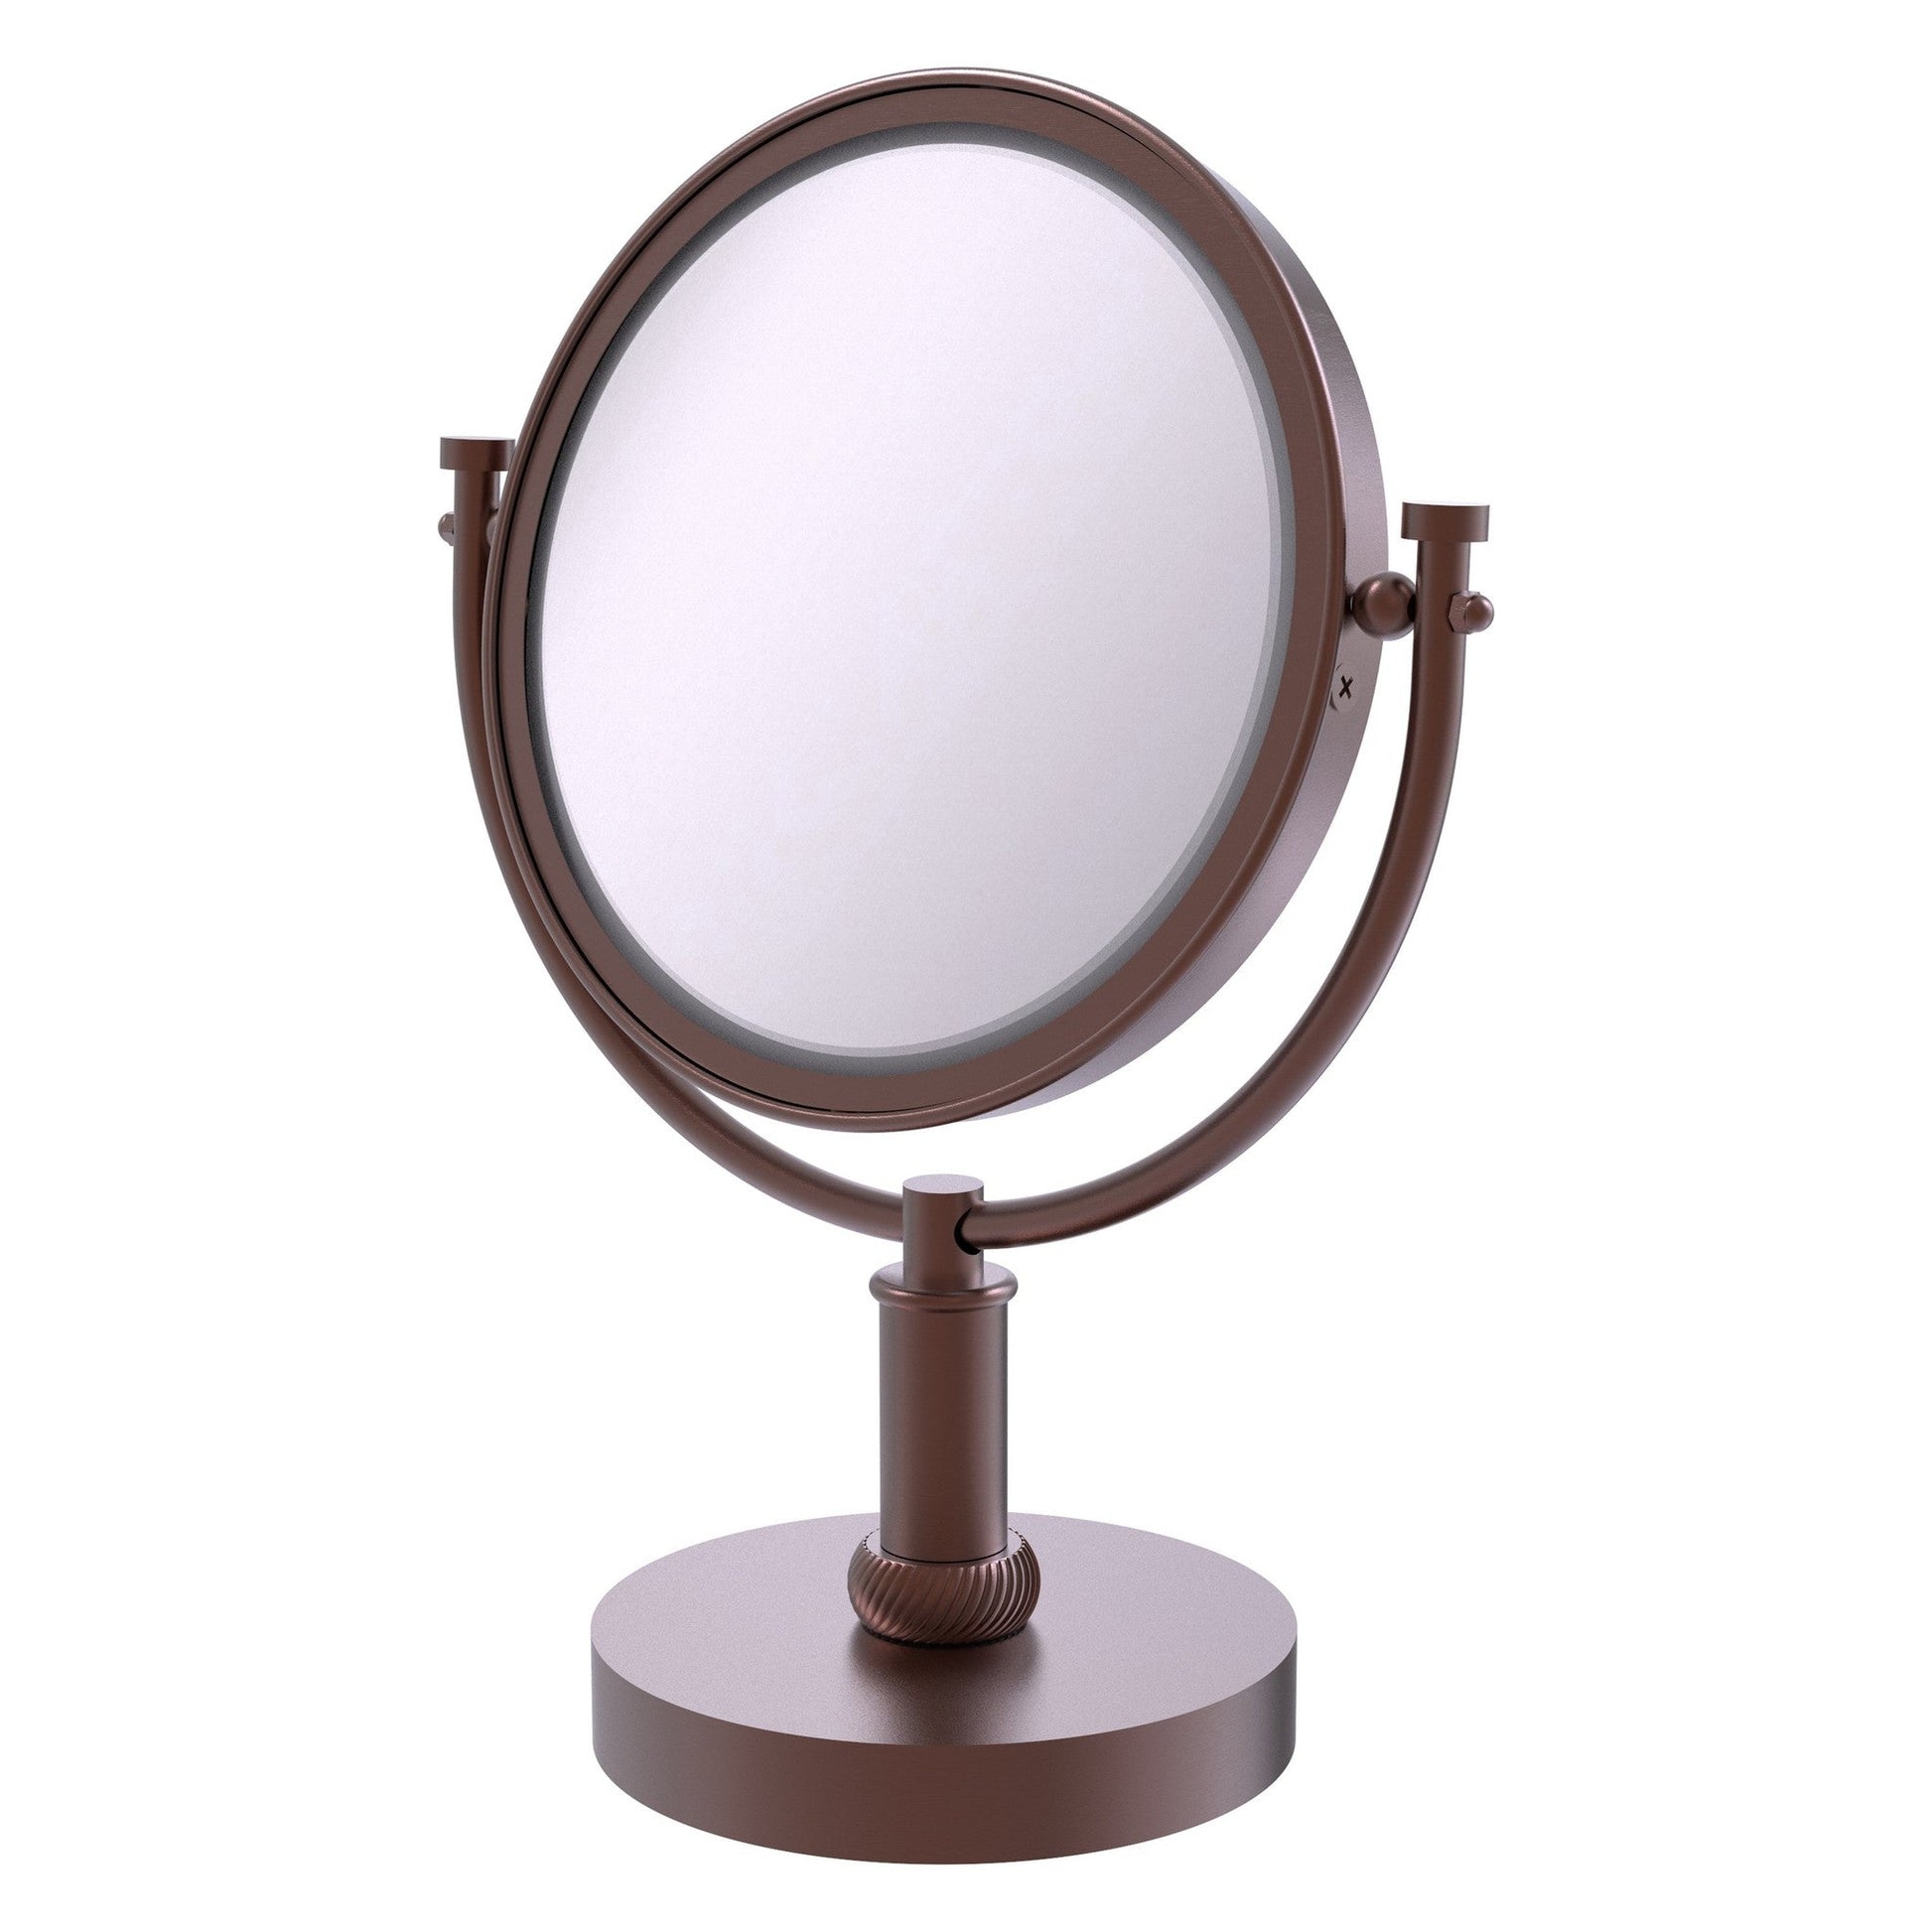 Allied Brass DM-4T/2X 8" x 8" Antique Copper Solid Brass Vanity Top Make-Up Mirror 2X Magnification